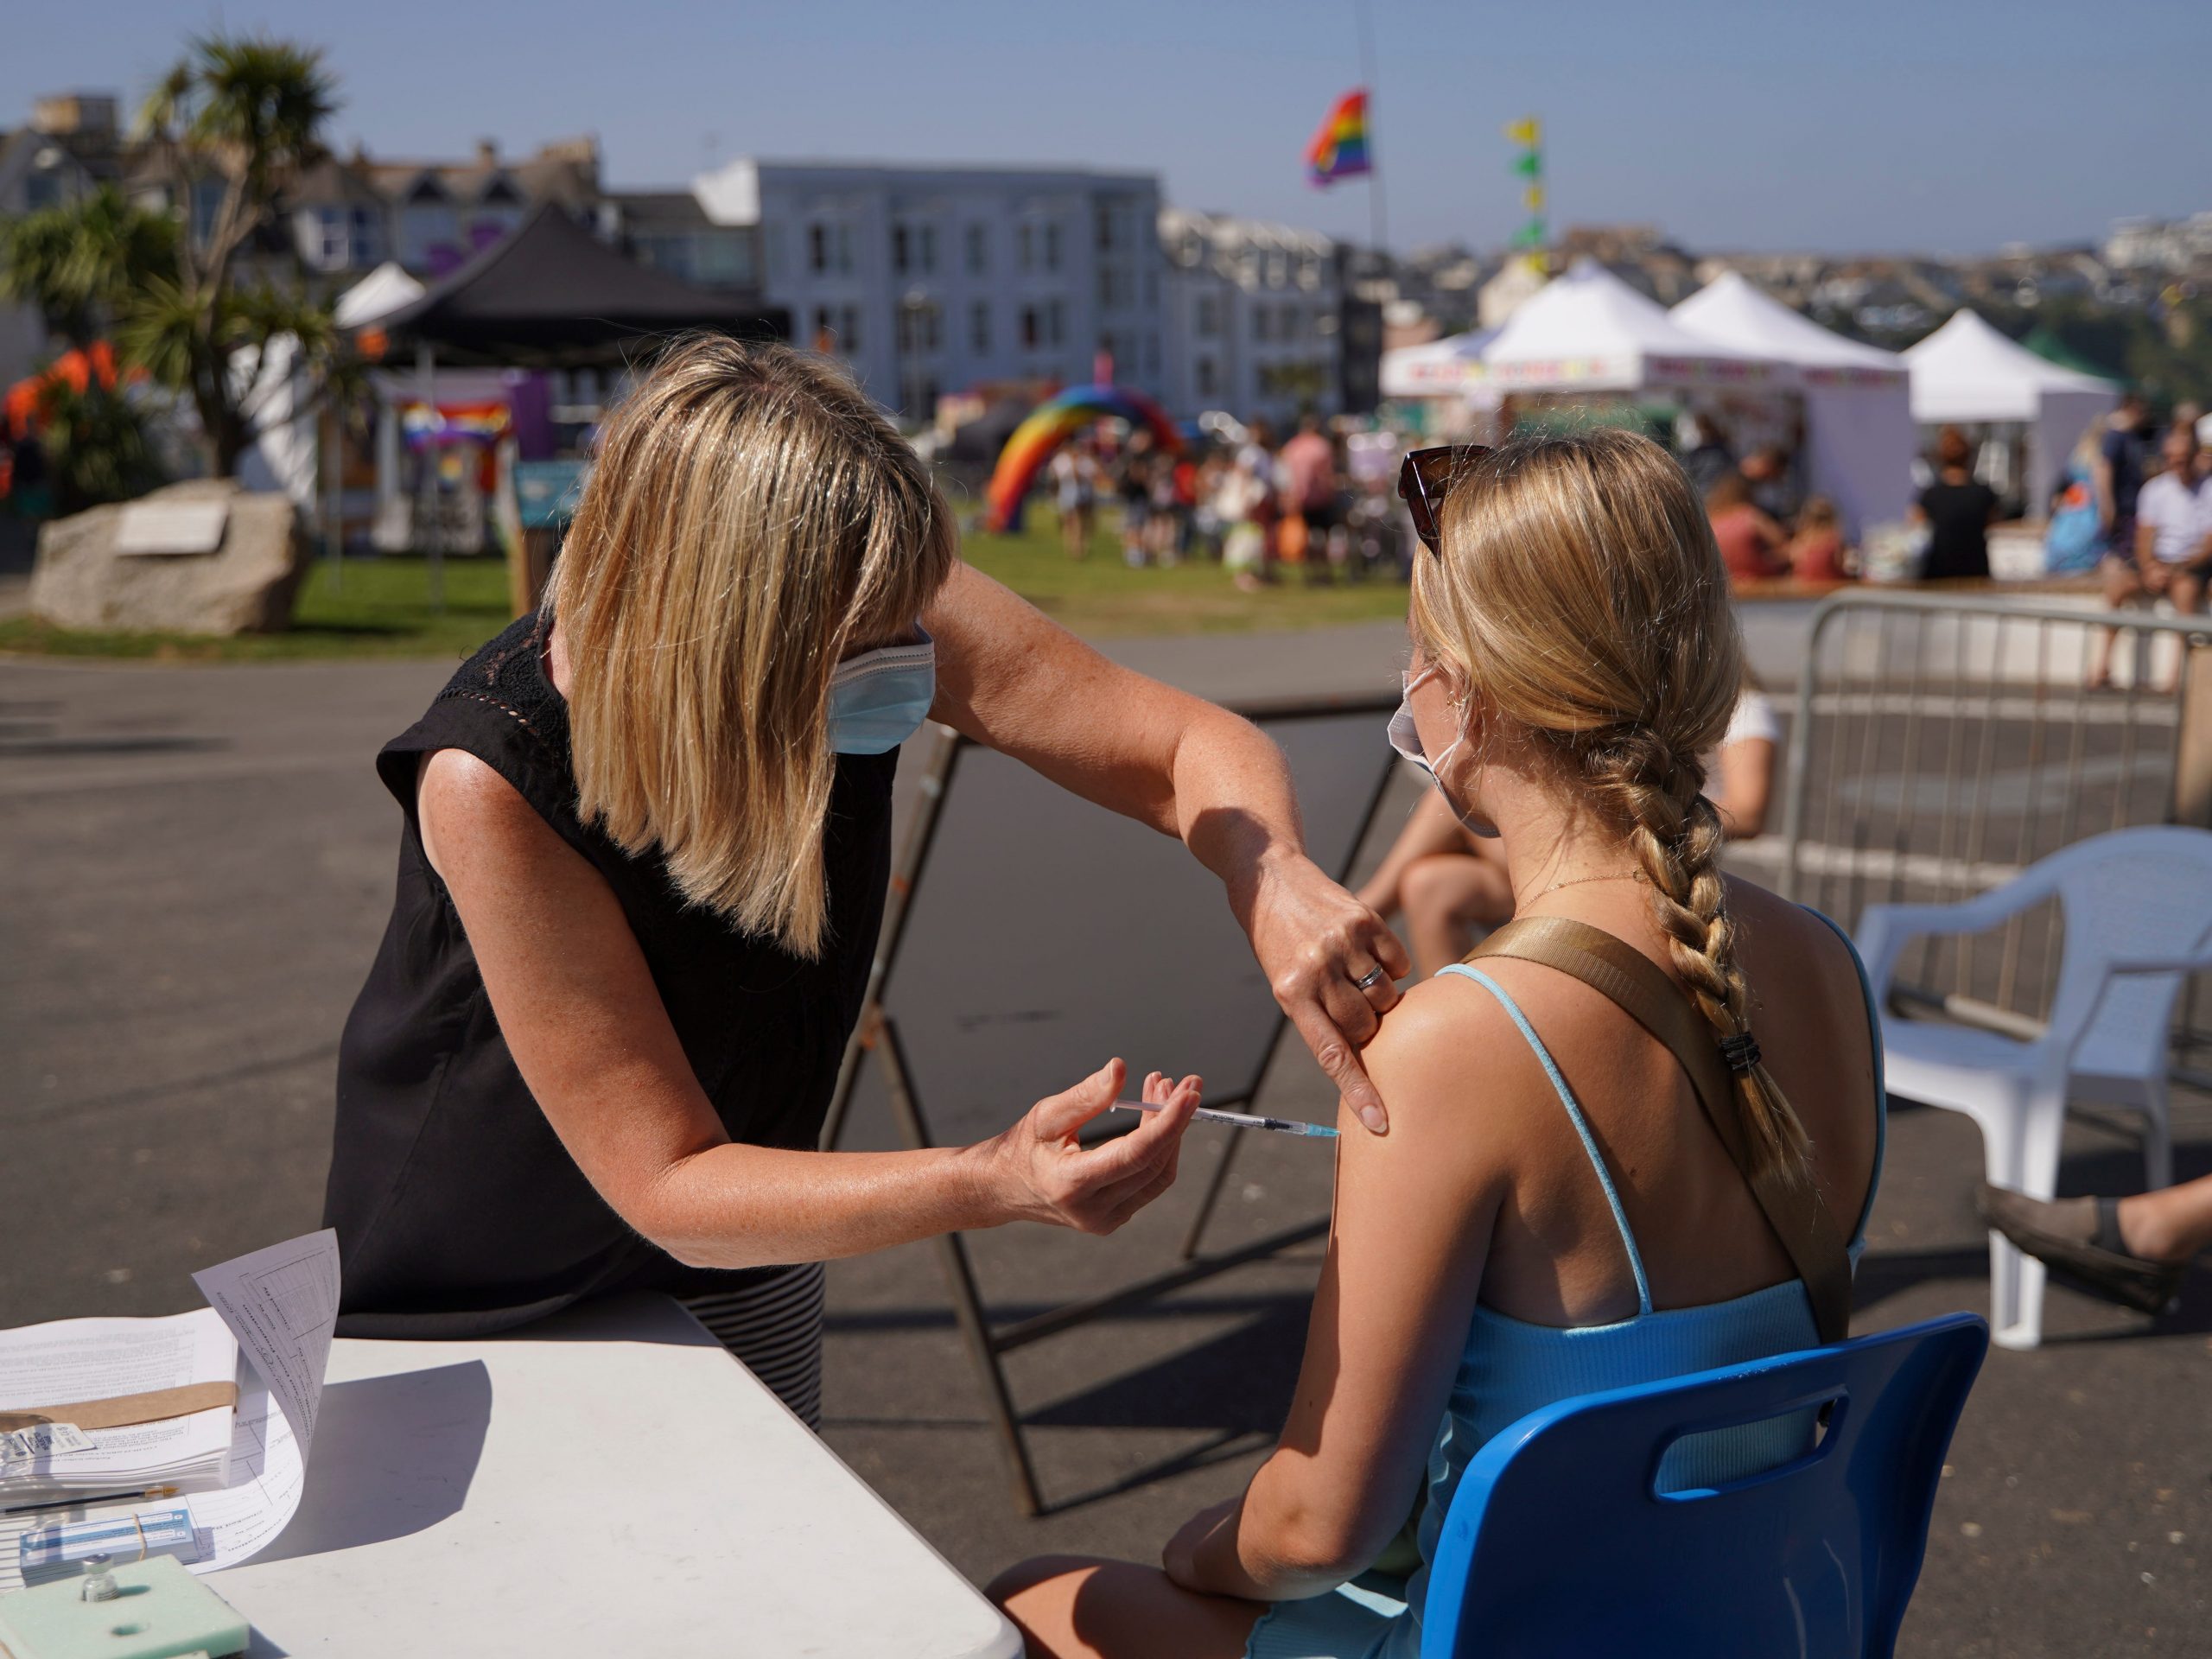 A member of the public is given a Covid vaccination by NHS staff during the first day of the Cornwall Pride LGBTQ+ festival on August 27, 2021 in Newquay, England.